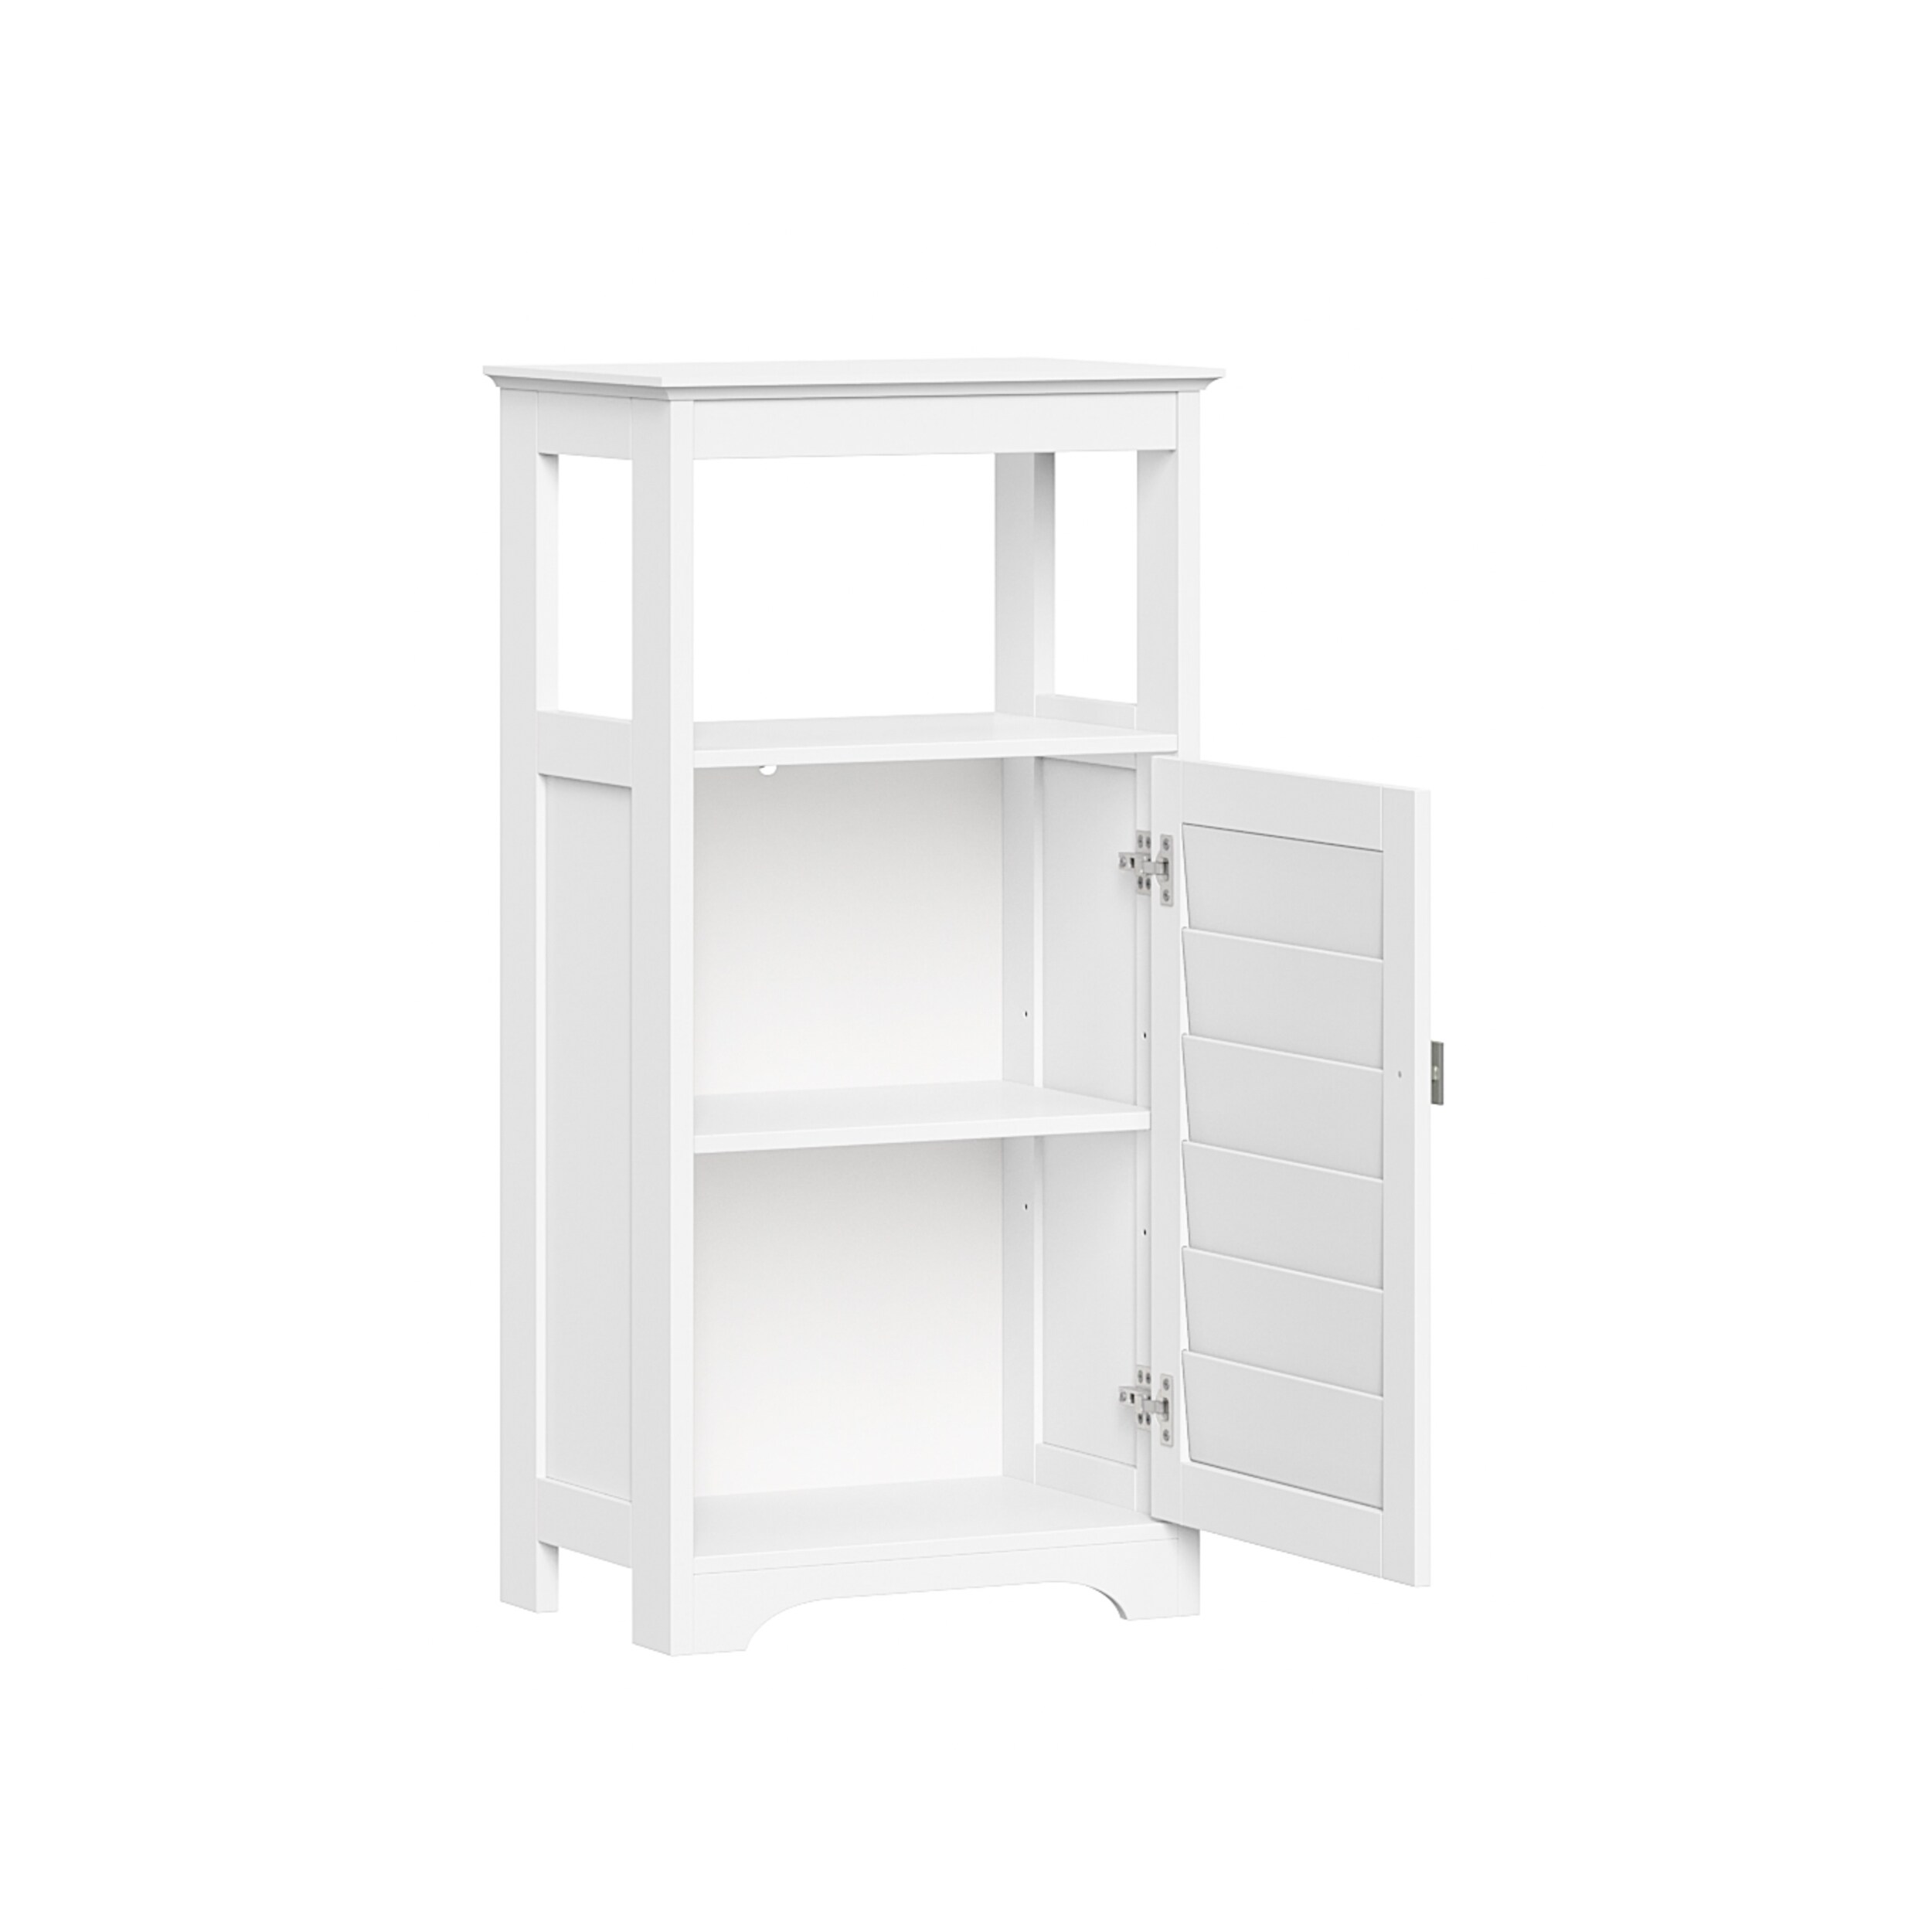 RiverRidge Brookfield 23.5-in x 25.19-in x 8.88-in White Soft Close Bathroom  Wall Cabinet in the Bathroom Wall Cabinets department at